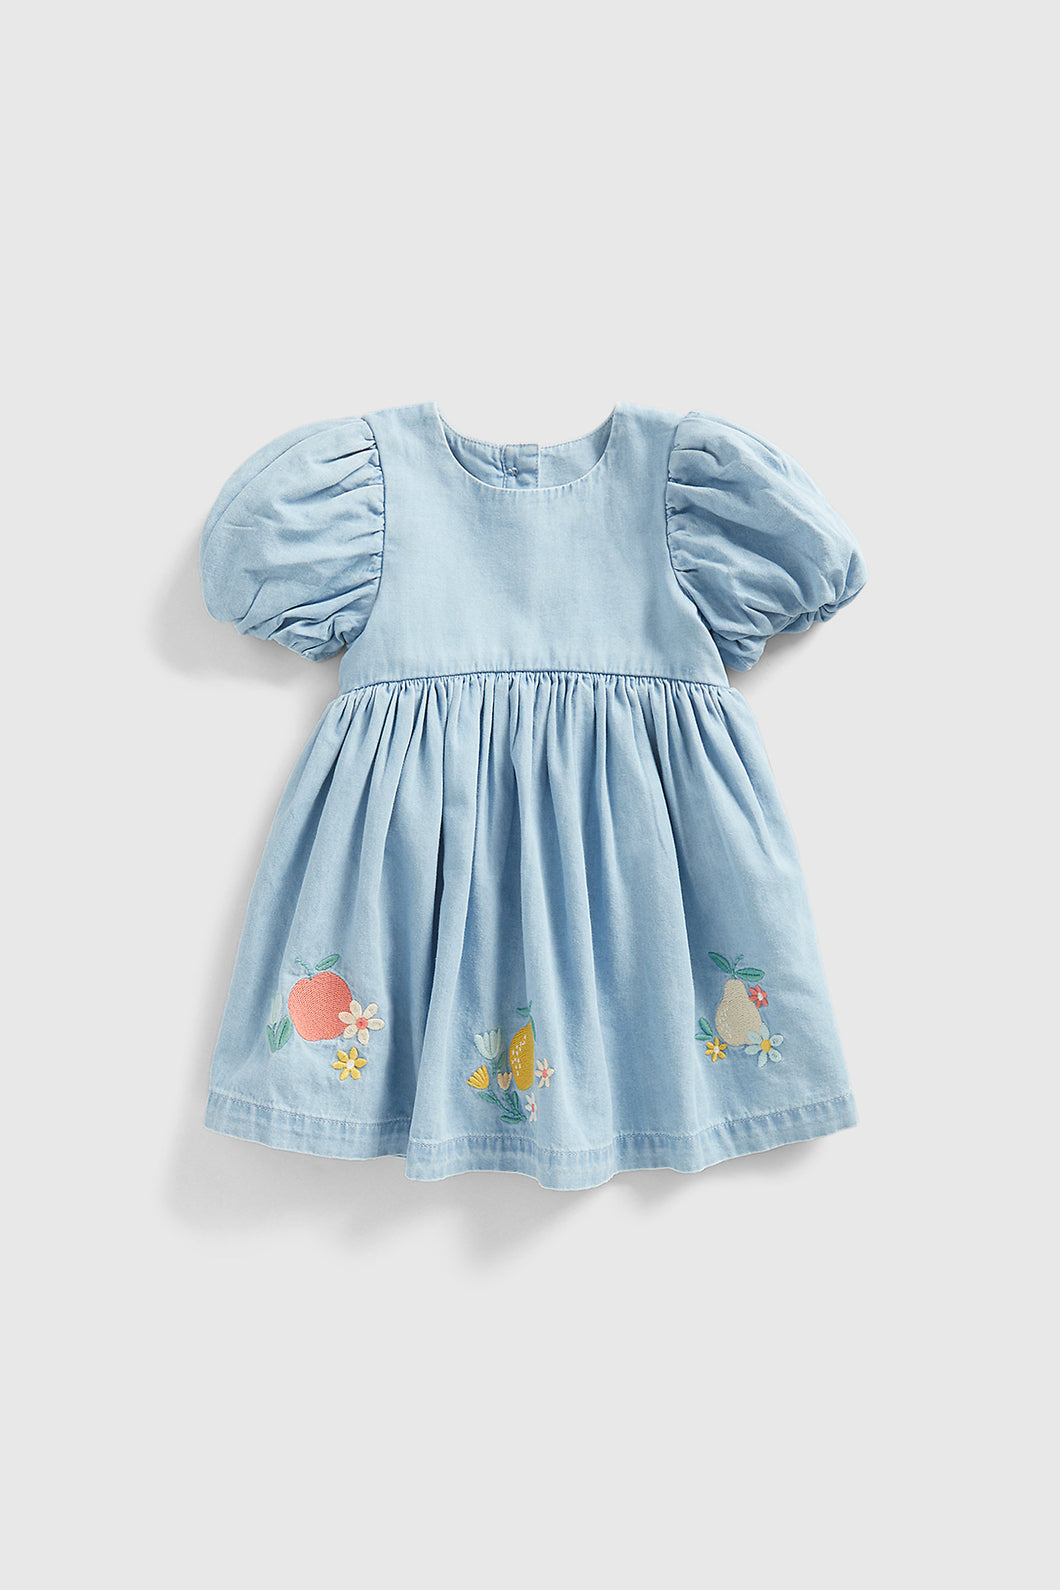 Mothercare Embroidered Denim Dress